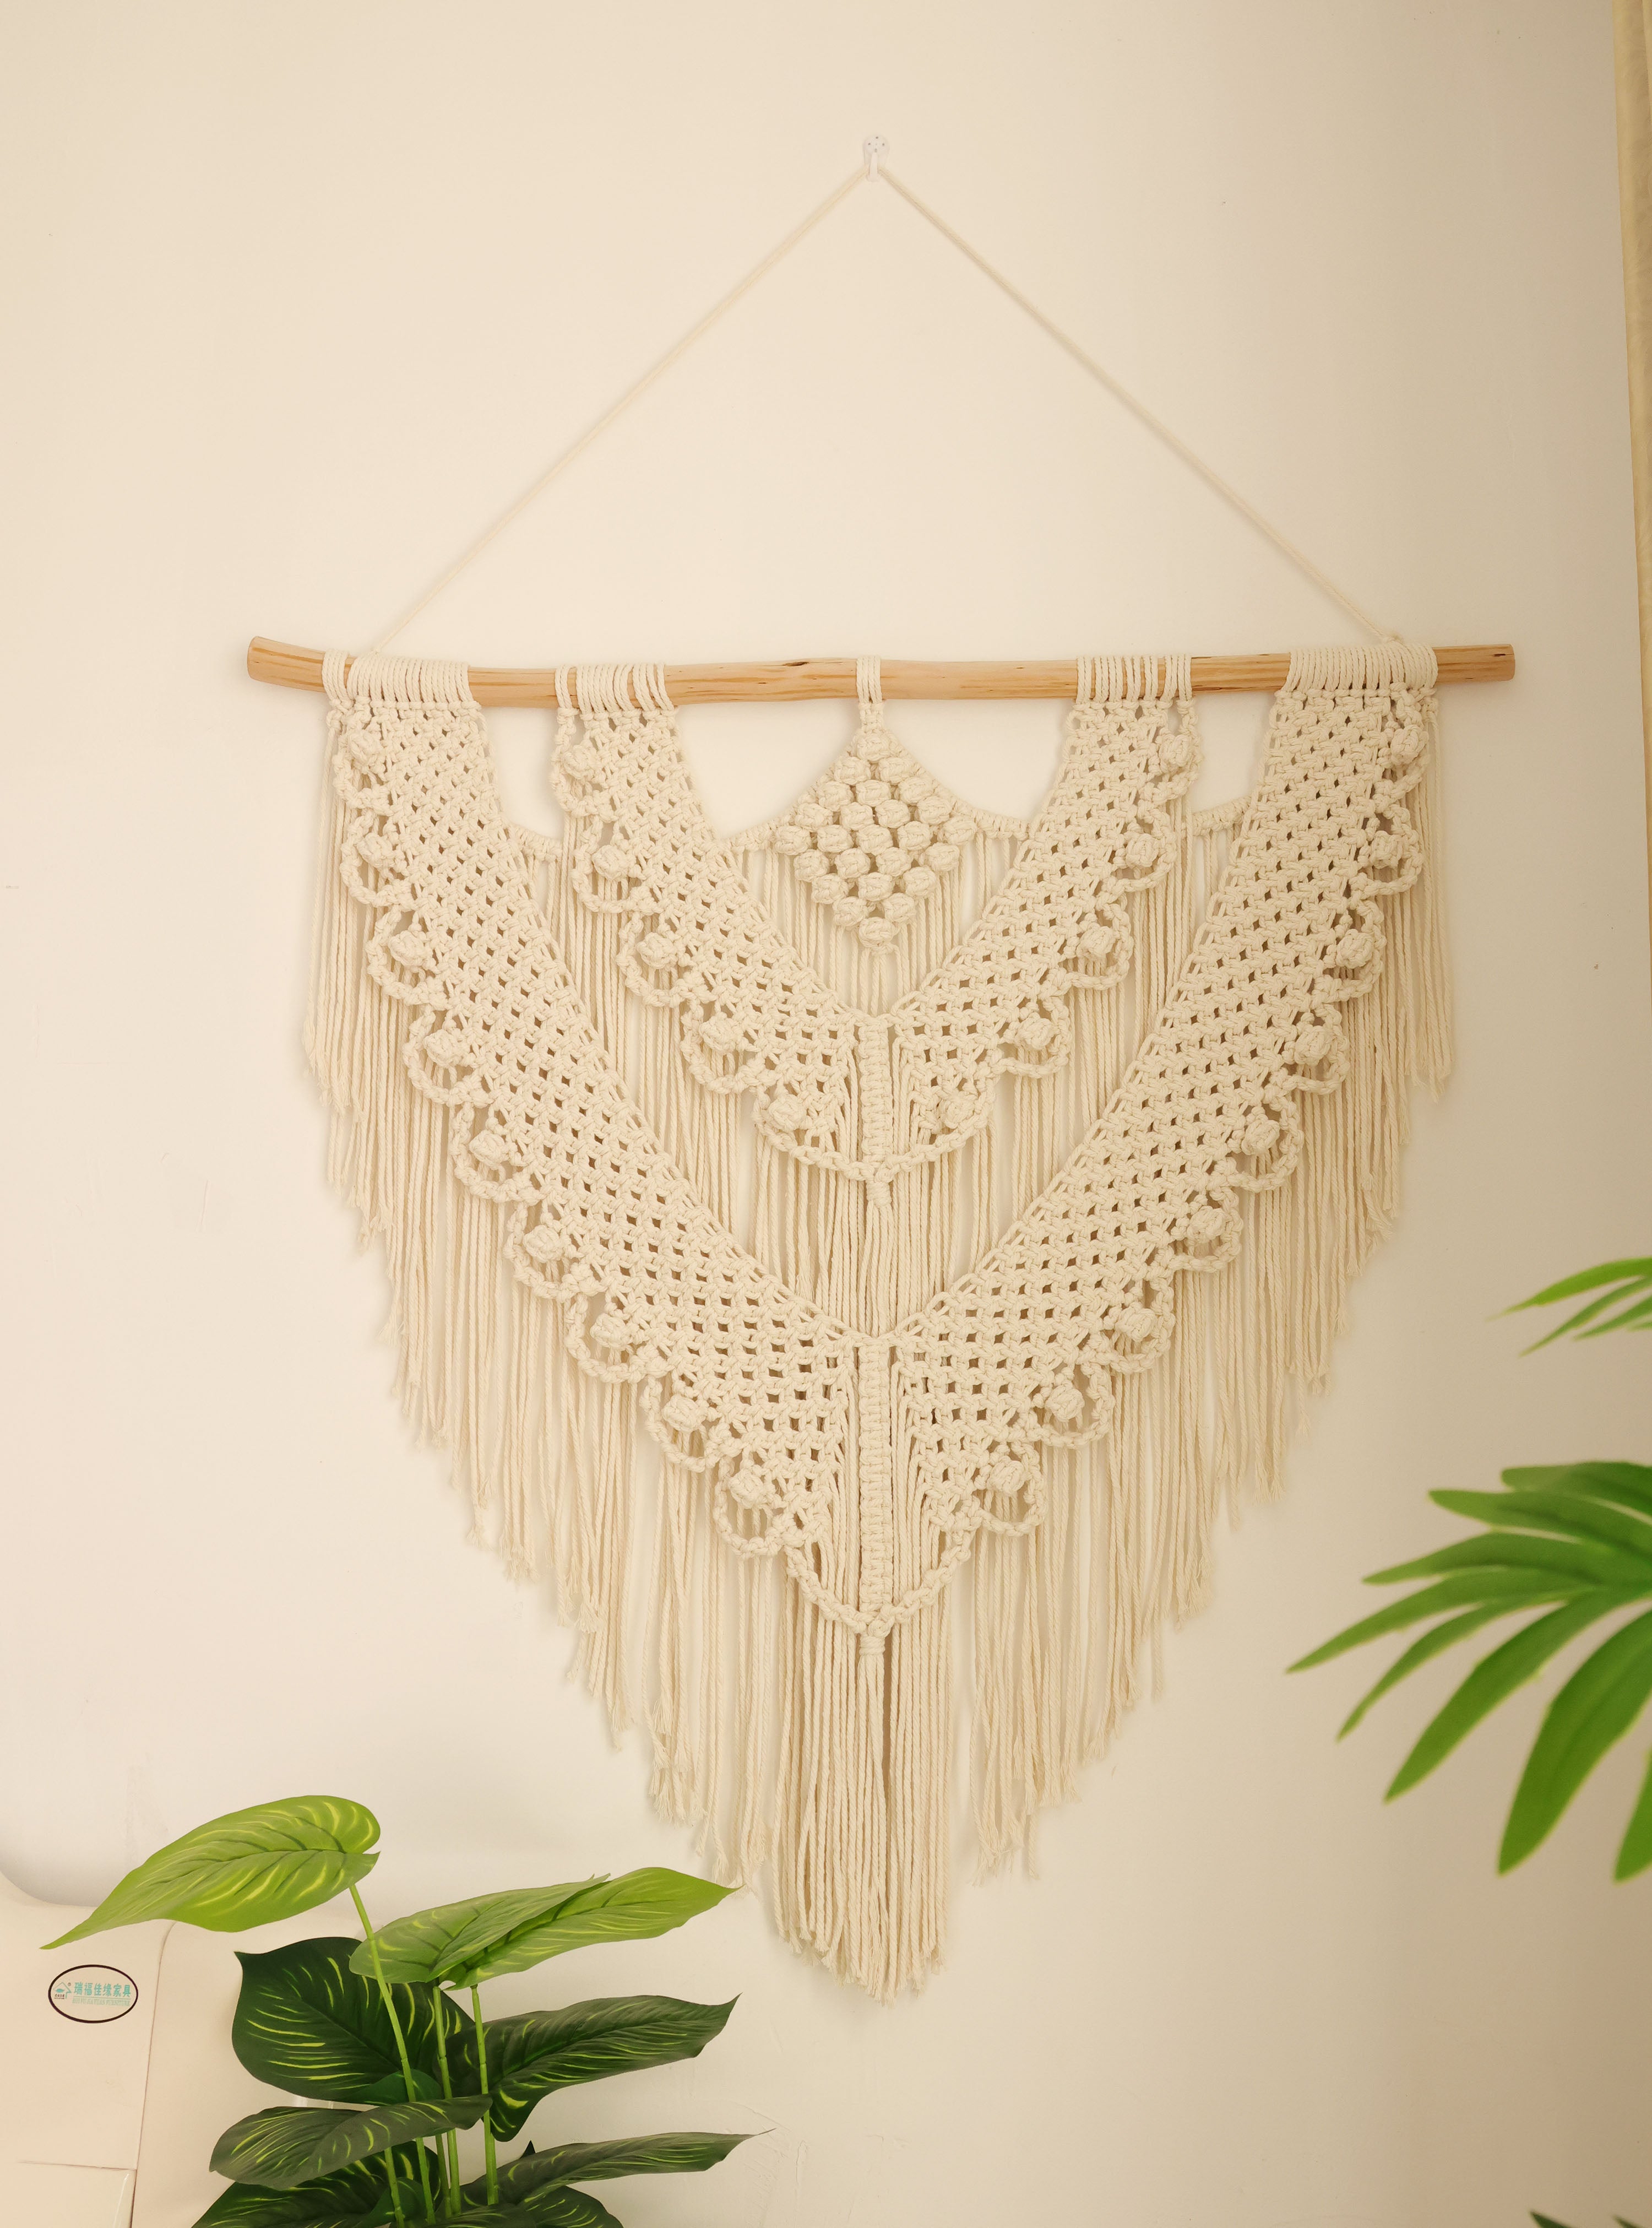 Macrame Large Wall Hanging, Handwoven nature cotton Tapestry wall hanging, Bohemian Modern wall art hanging home decor